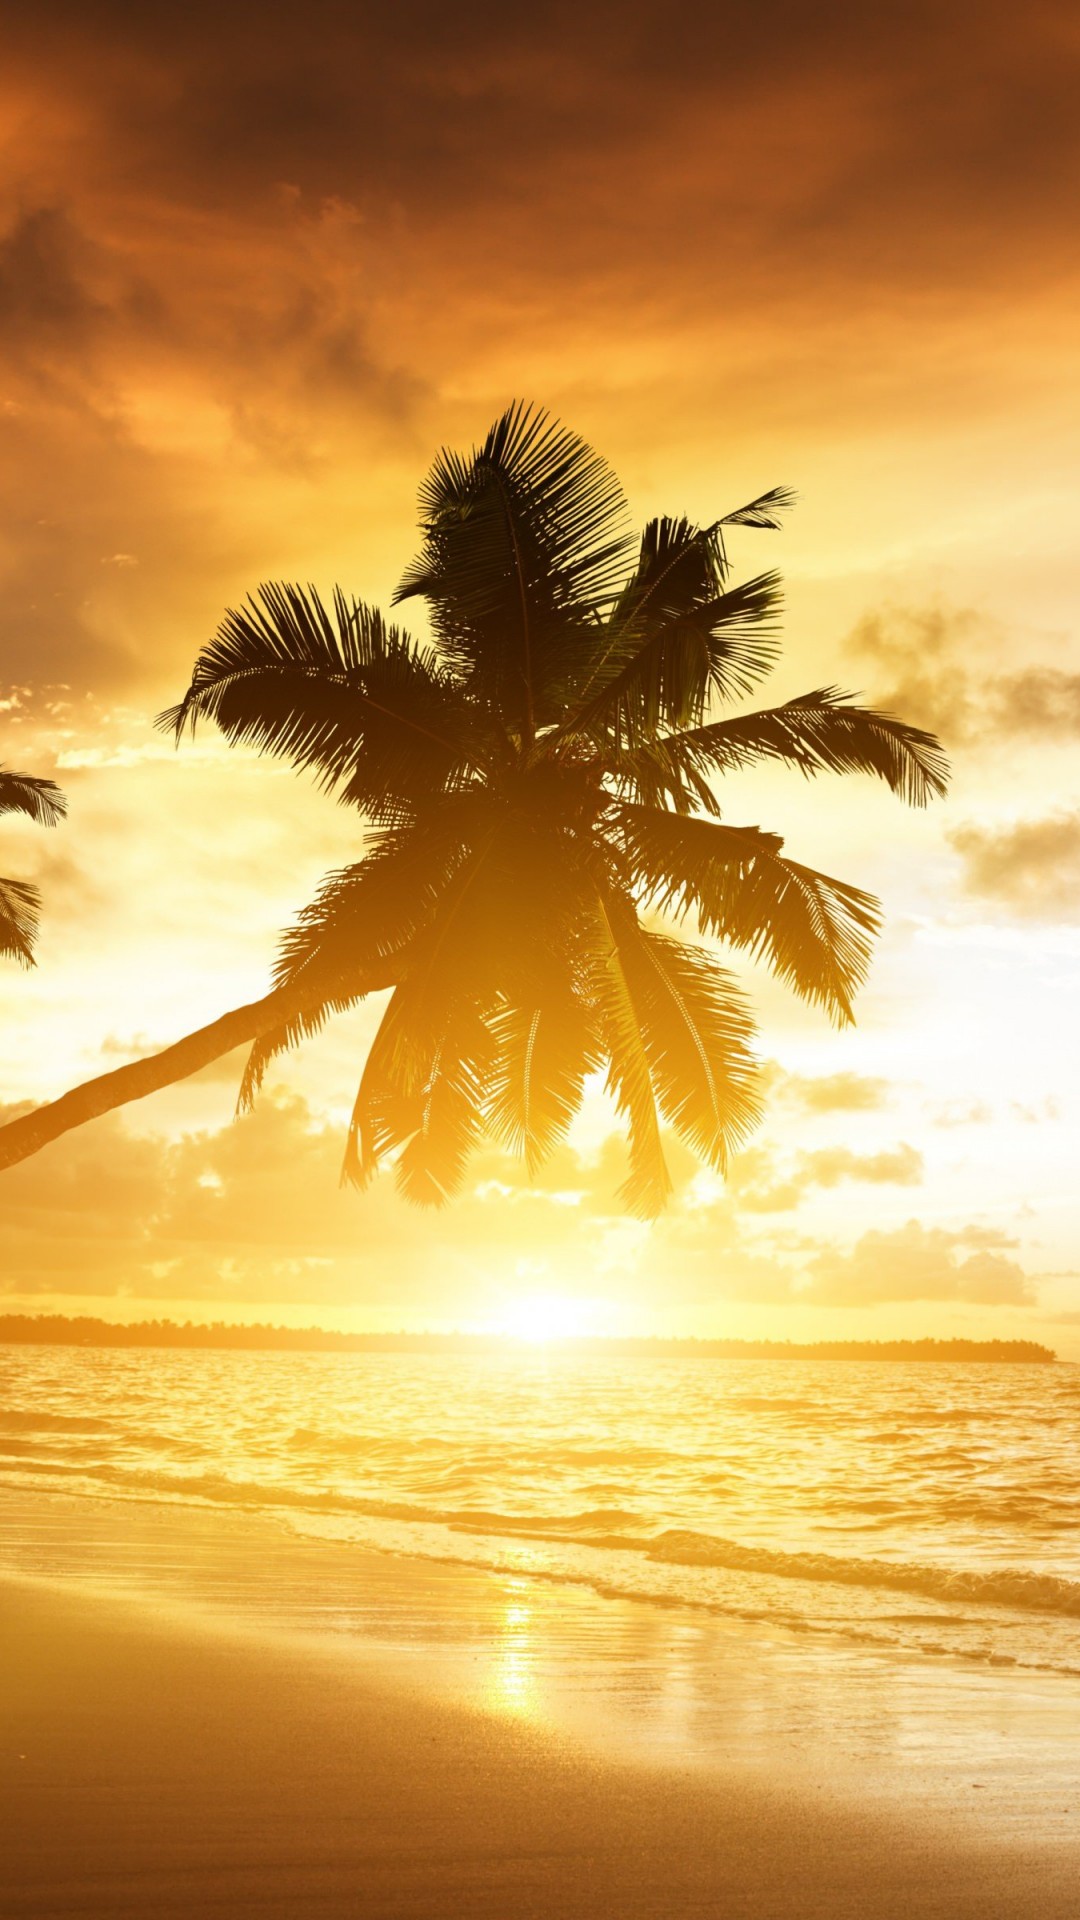 Beach With Palm Trees At Sunset Wallpaper for Google Nexus 5X